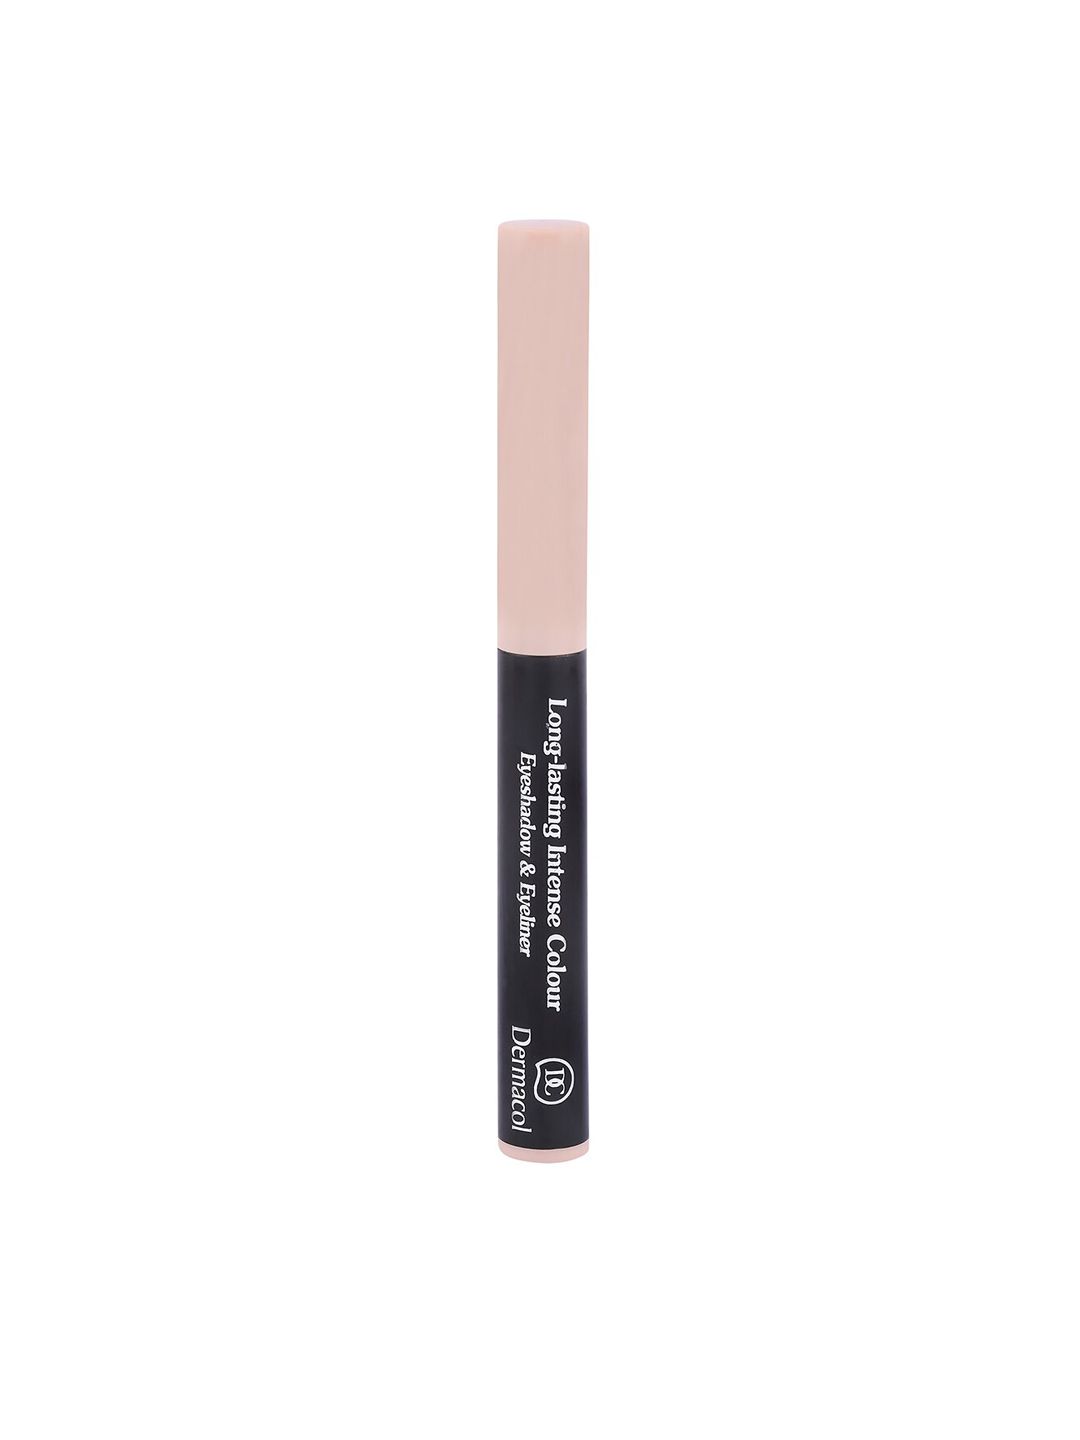 Dermacol Nude-Coloured 3100 Long-Lasting Intense Colour No.1 Eyeshadow 1.6 g Price in India